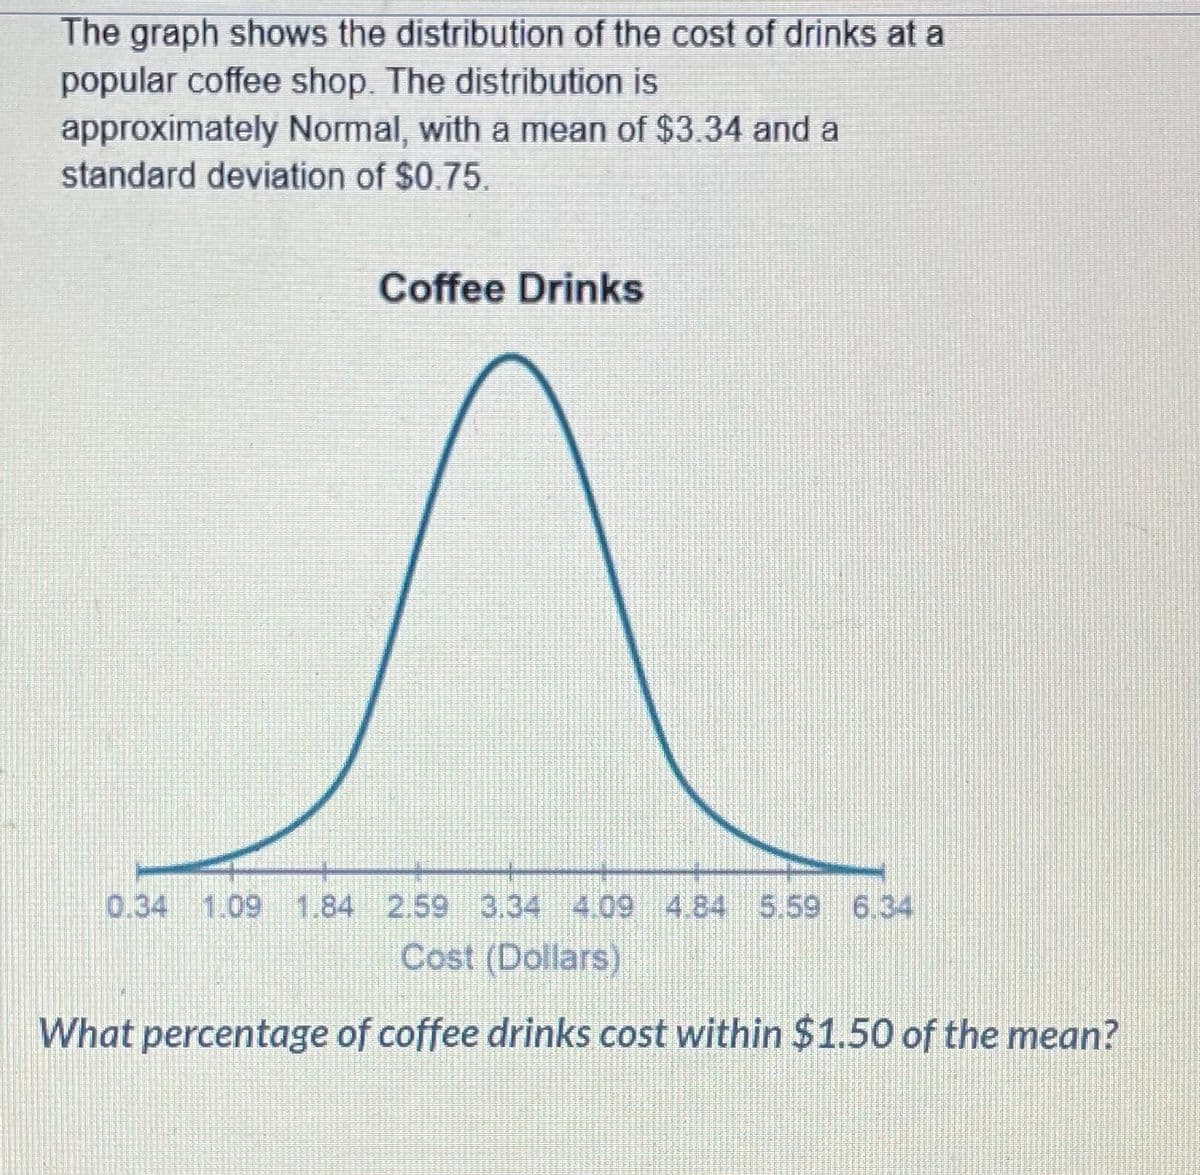 The graph shows the distribution of the cost of drinks at a
popular coffee shop. The distribution is
approximately Normal, with a mean of $3.34 and a
standard deviation of $0.75.
Coffee Drinks
0.34 1.09 1.84 2.59 3.34 409 484 5.59 6.34
Cost (Dollars)
What percentage of coffee drinks cost within $1.50 of the mean?
